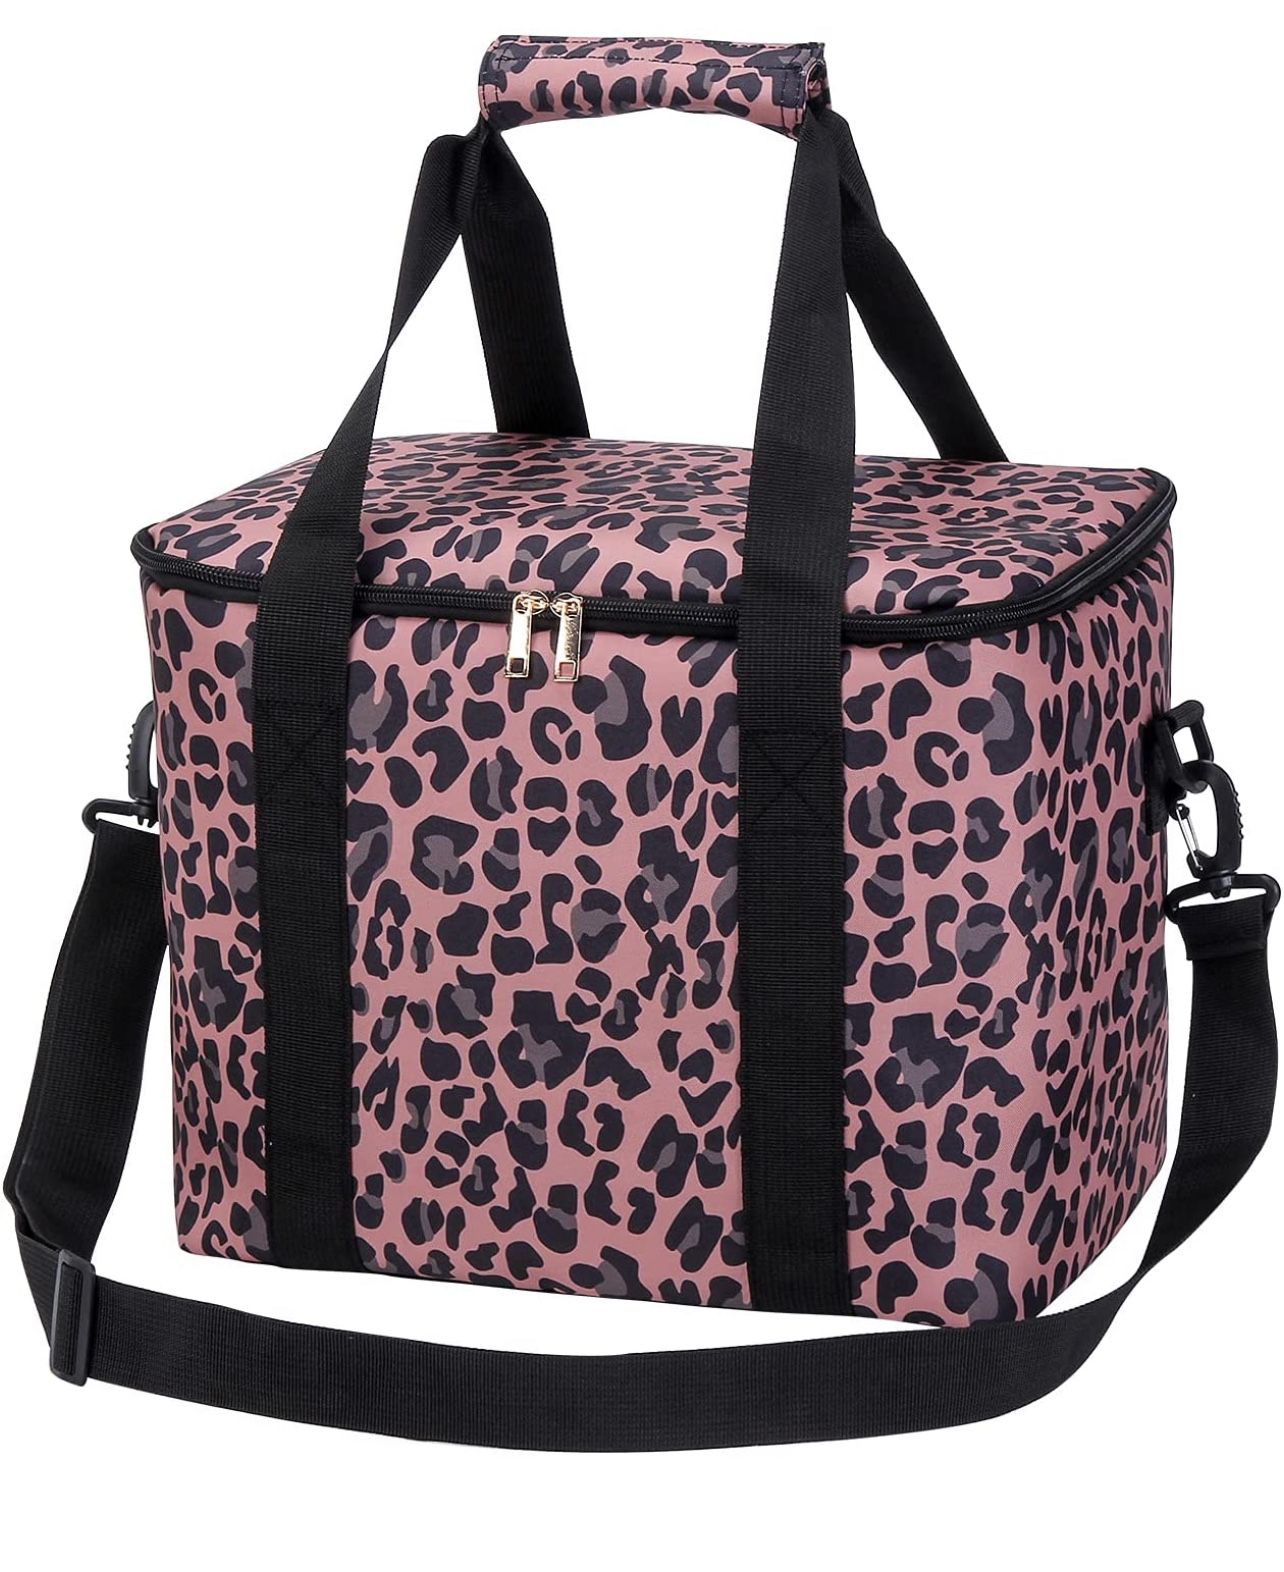 Leopard Lunch Cooler Bags Insulated Large Lunch Box